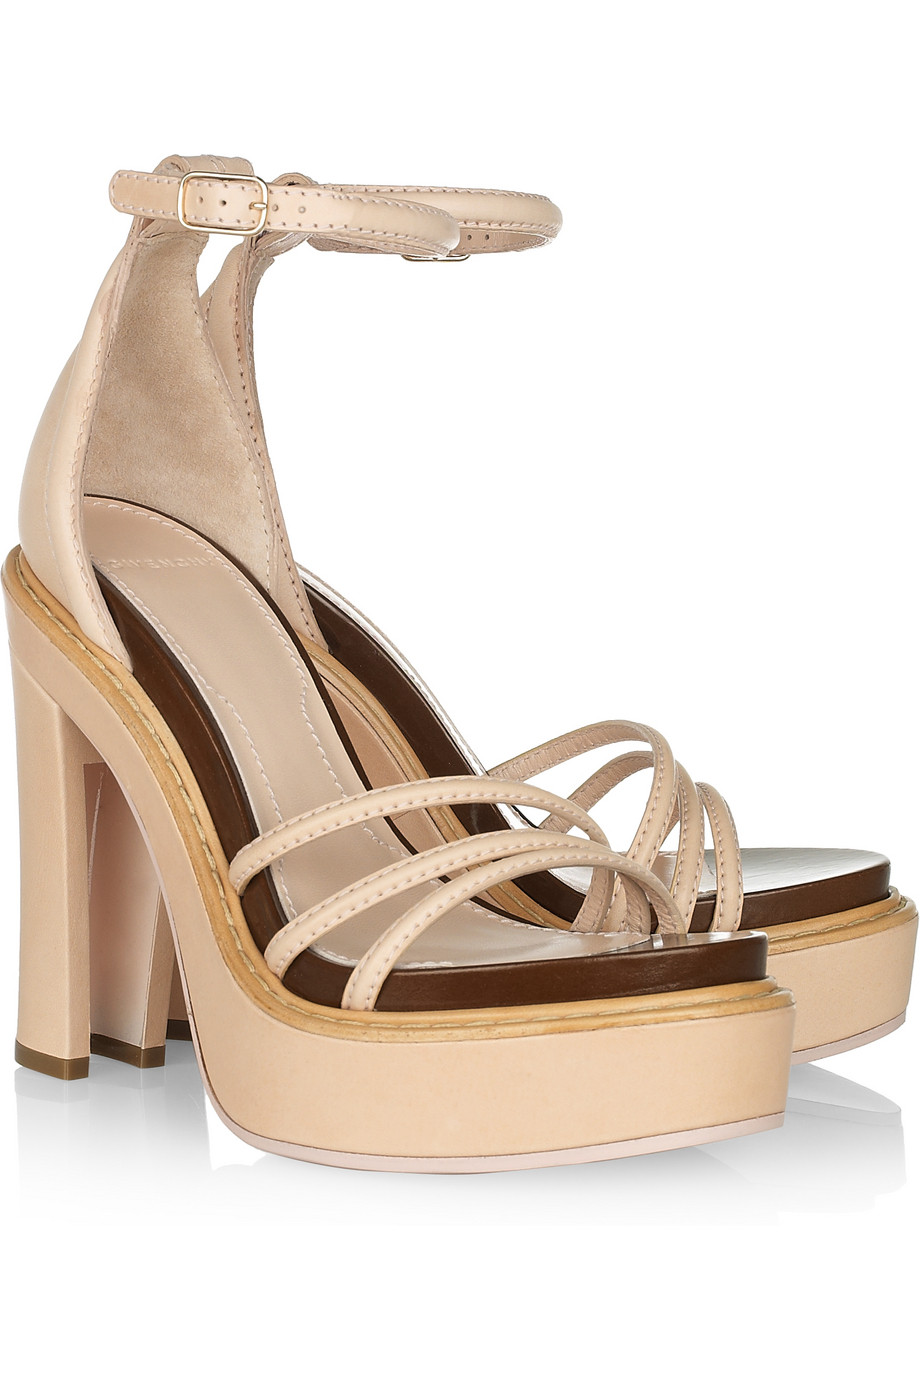 Lyst - Givenchy Leather Platform Sandals in Natural